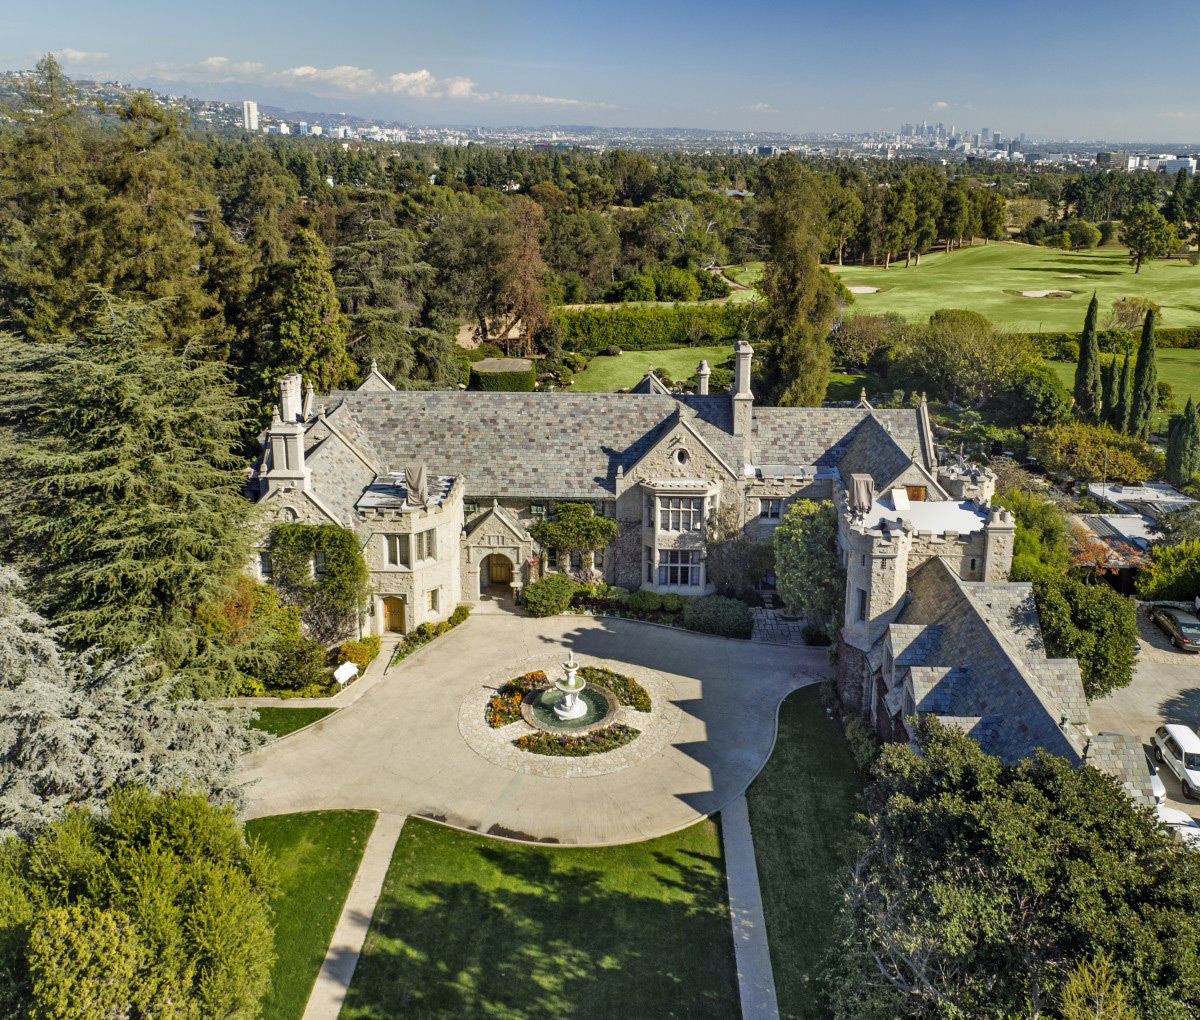 Playboy Mansion On Sale For $200 Million, But Hefner Included - eXtravaganzi1200 x 1020